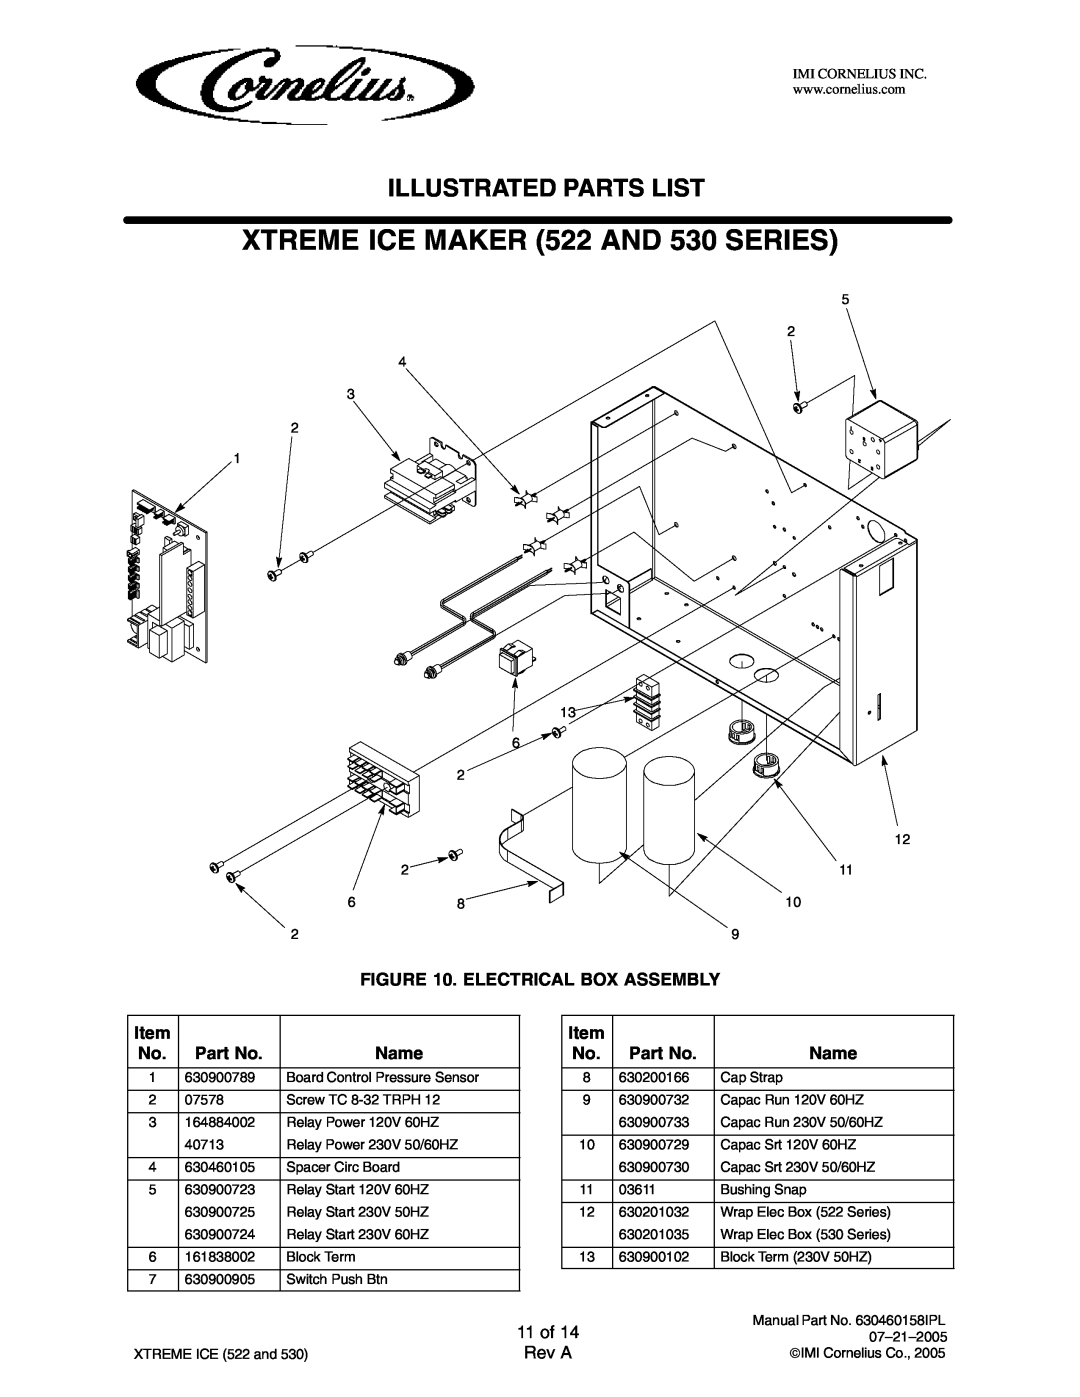 Cornelius 631805002 Electrical Box Assembly, 11 of, XTREME ICE MAKER 522 AND 530 SERIES, Illustrated Parts List, Name 